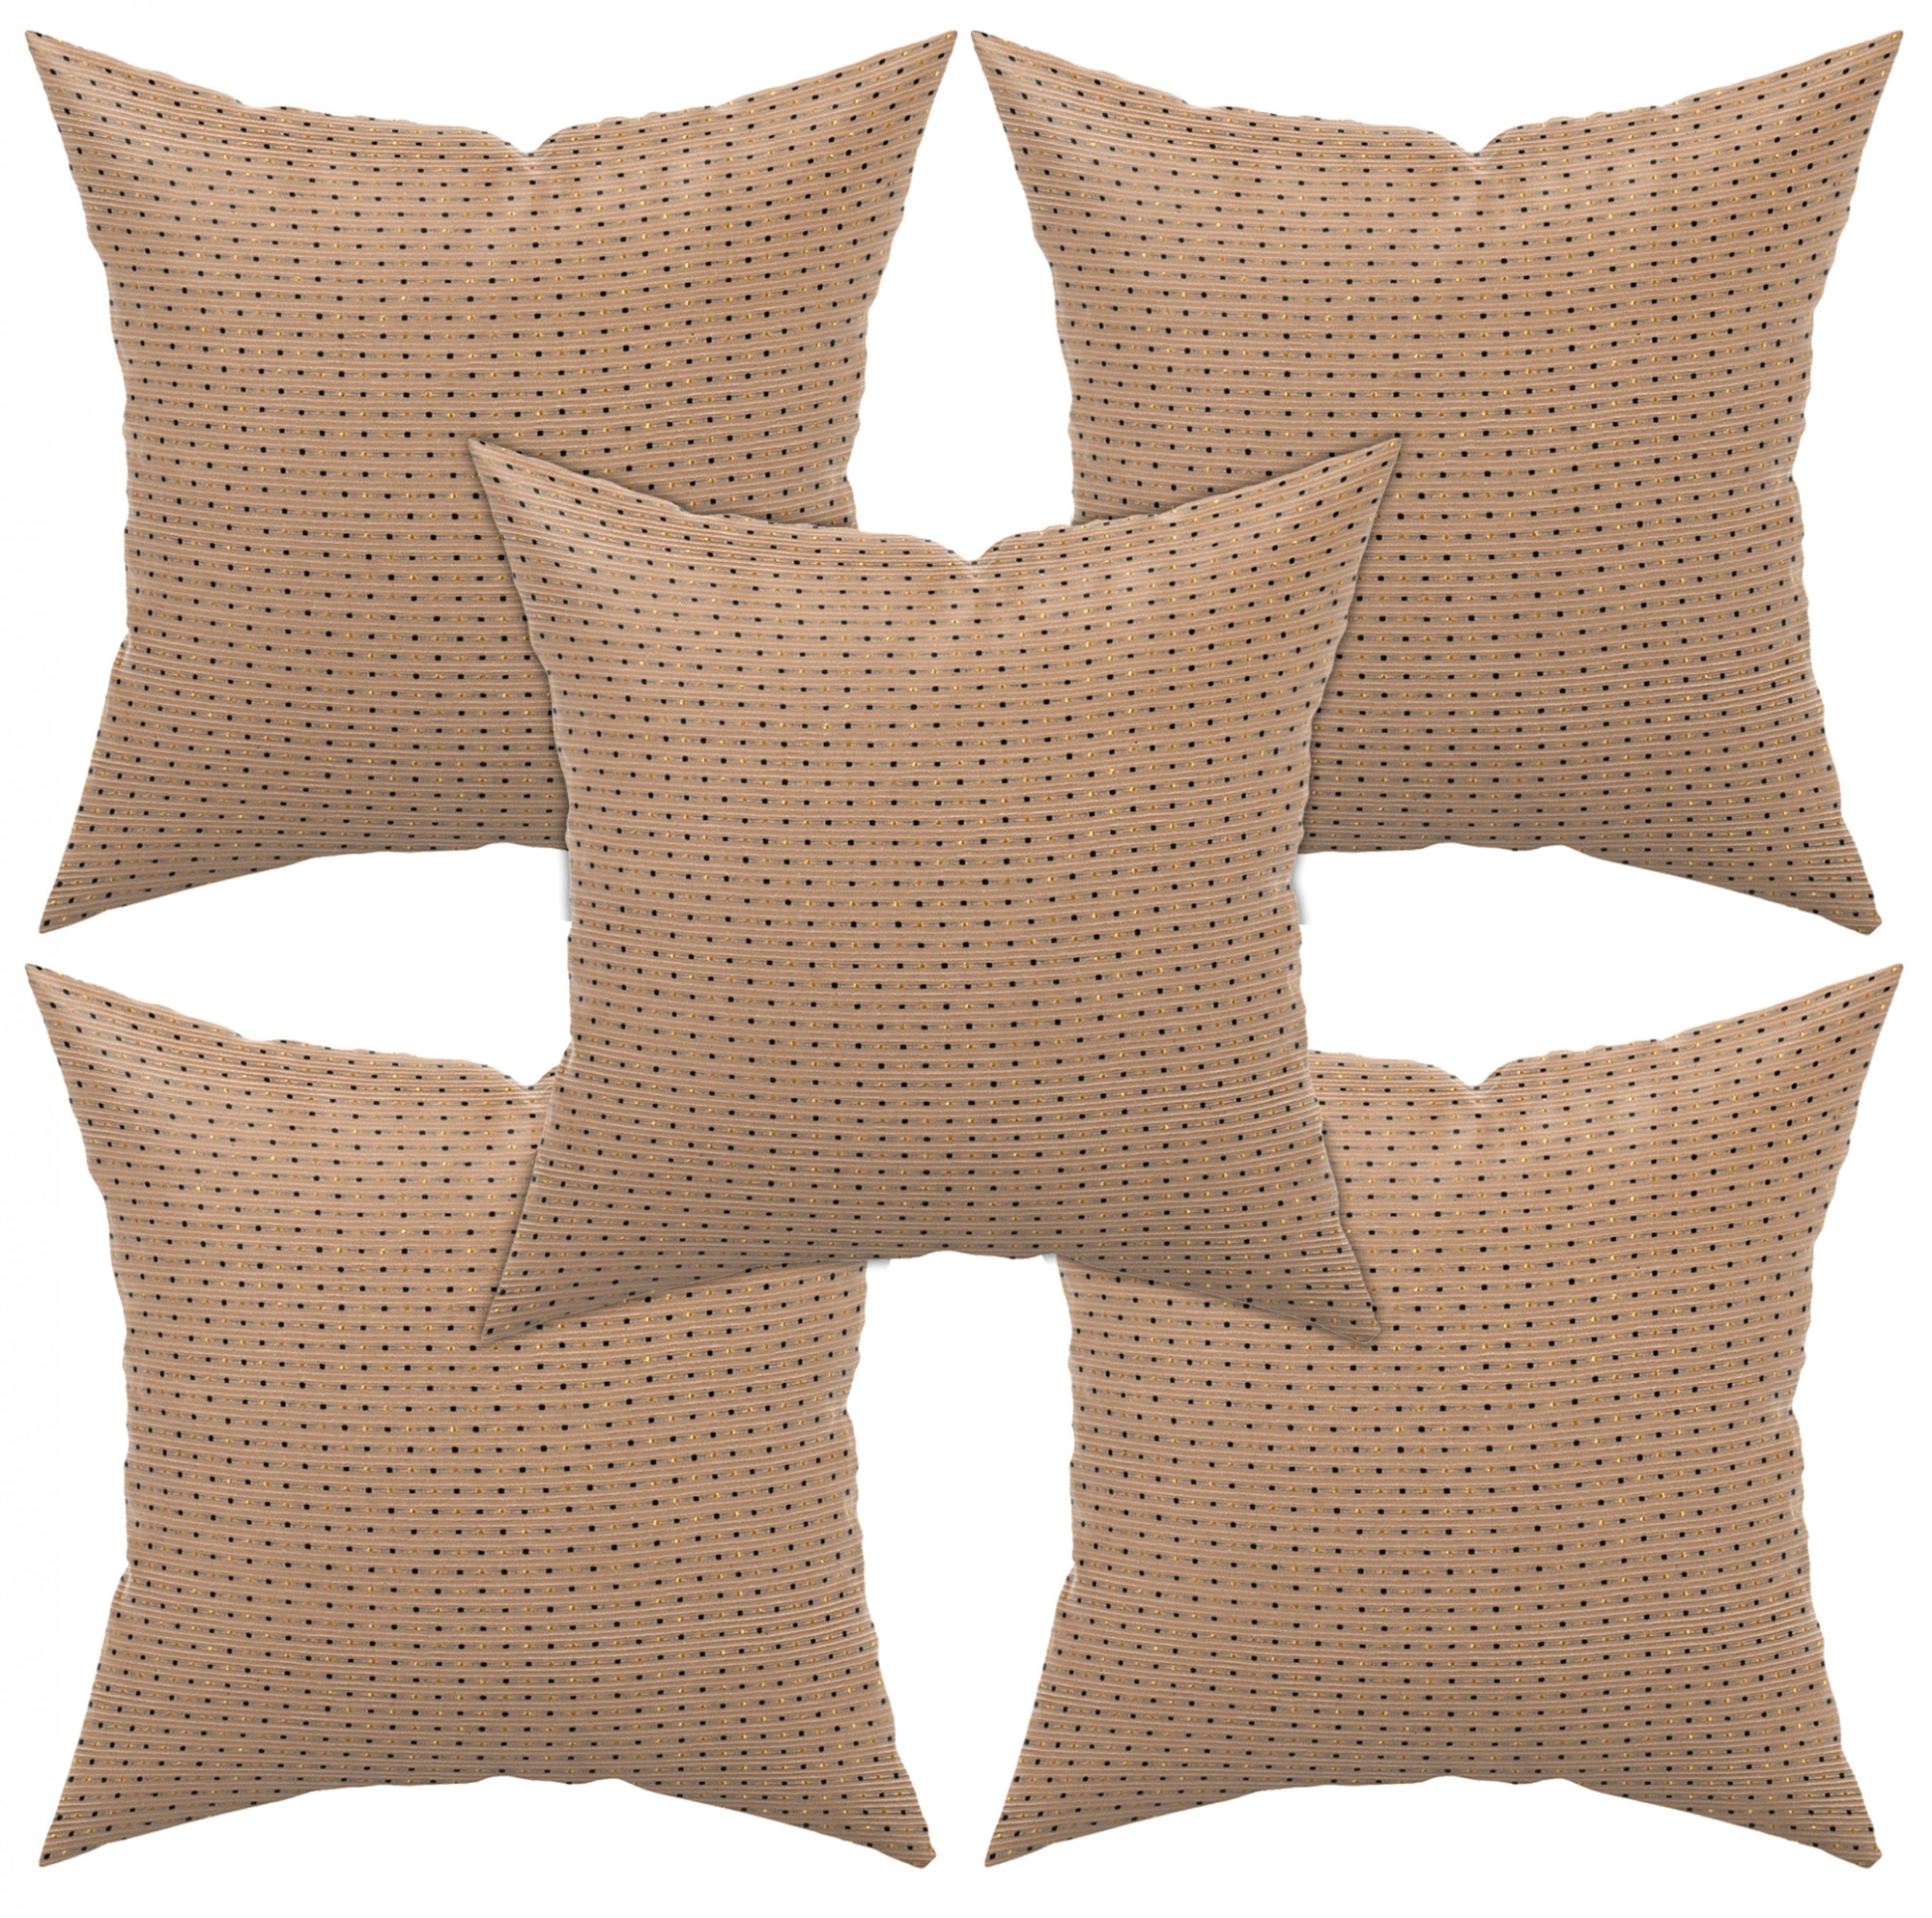 Kuber Industries Velvet Dot Printed Soft Decorative Square Throw Pillow Cover, Cushion Covers, Pillow Case For Sofa Couch Bed Chair 16x16 Inch-(Cream)